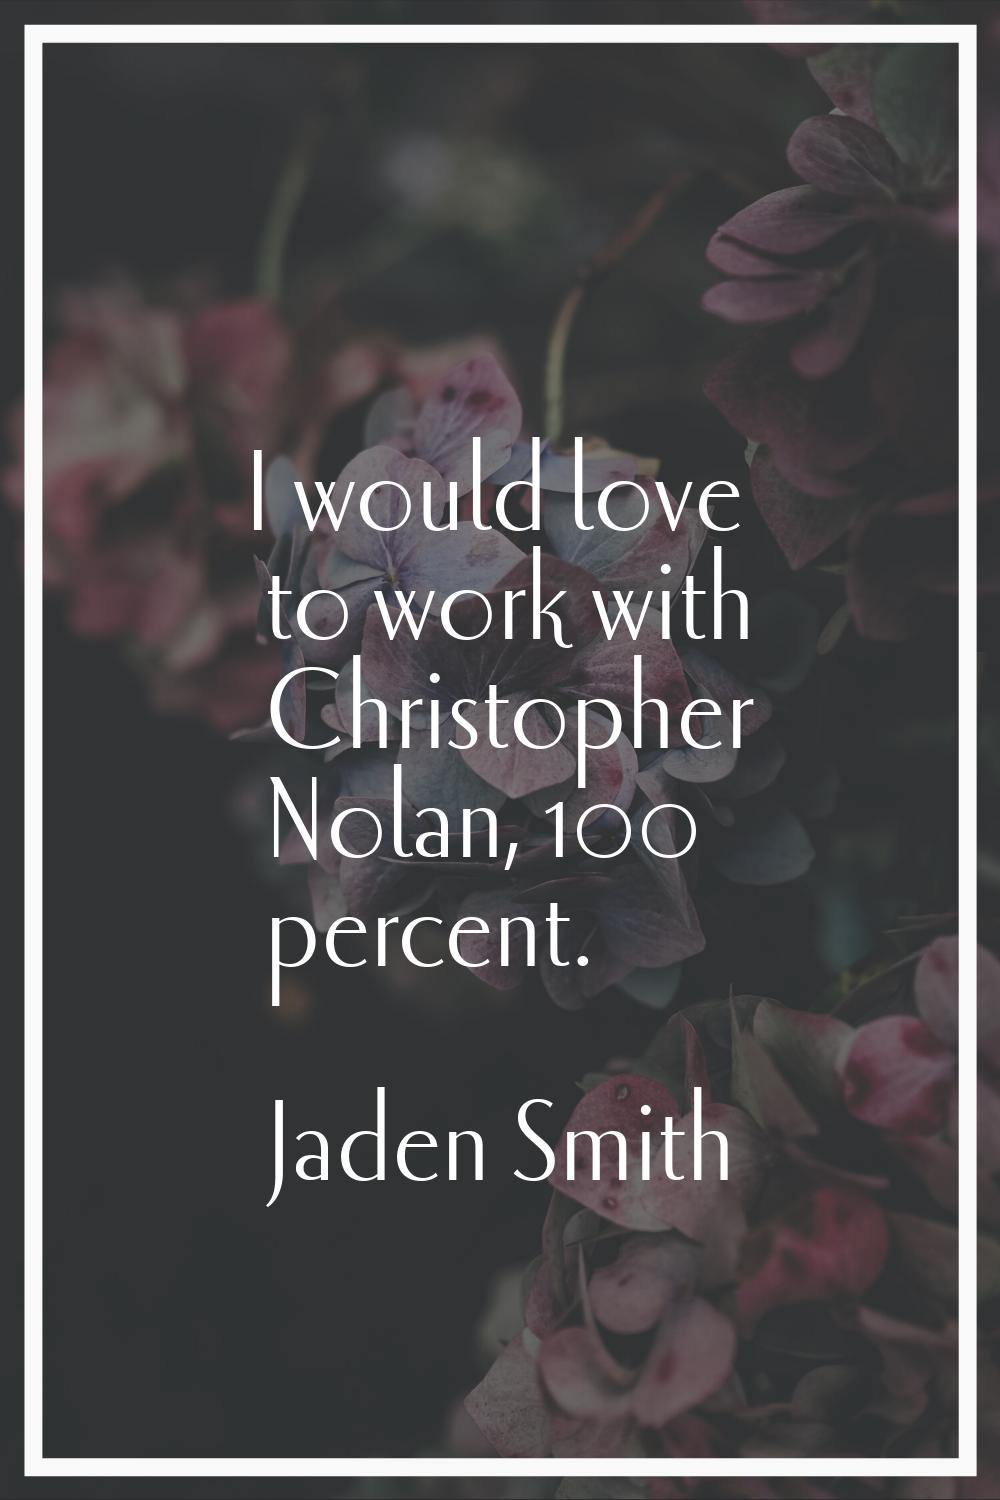 I would love to work with Christopher Nolan, 100 percent.